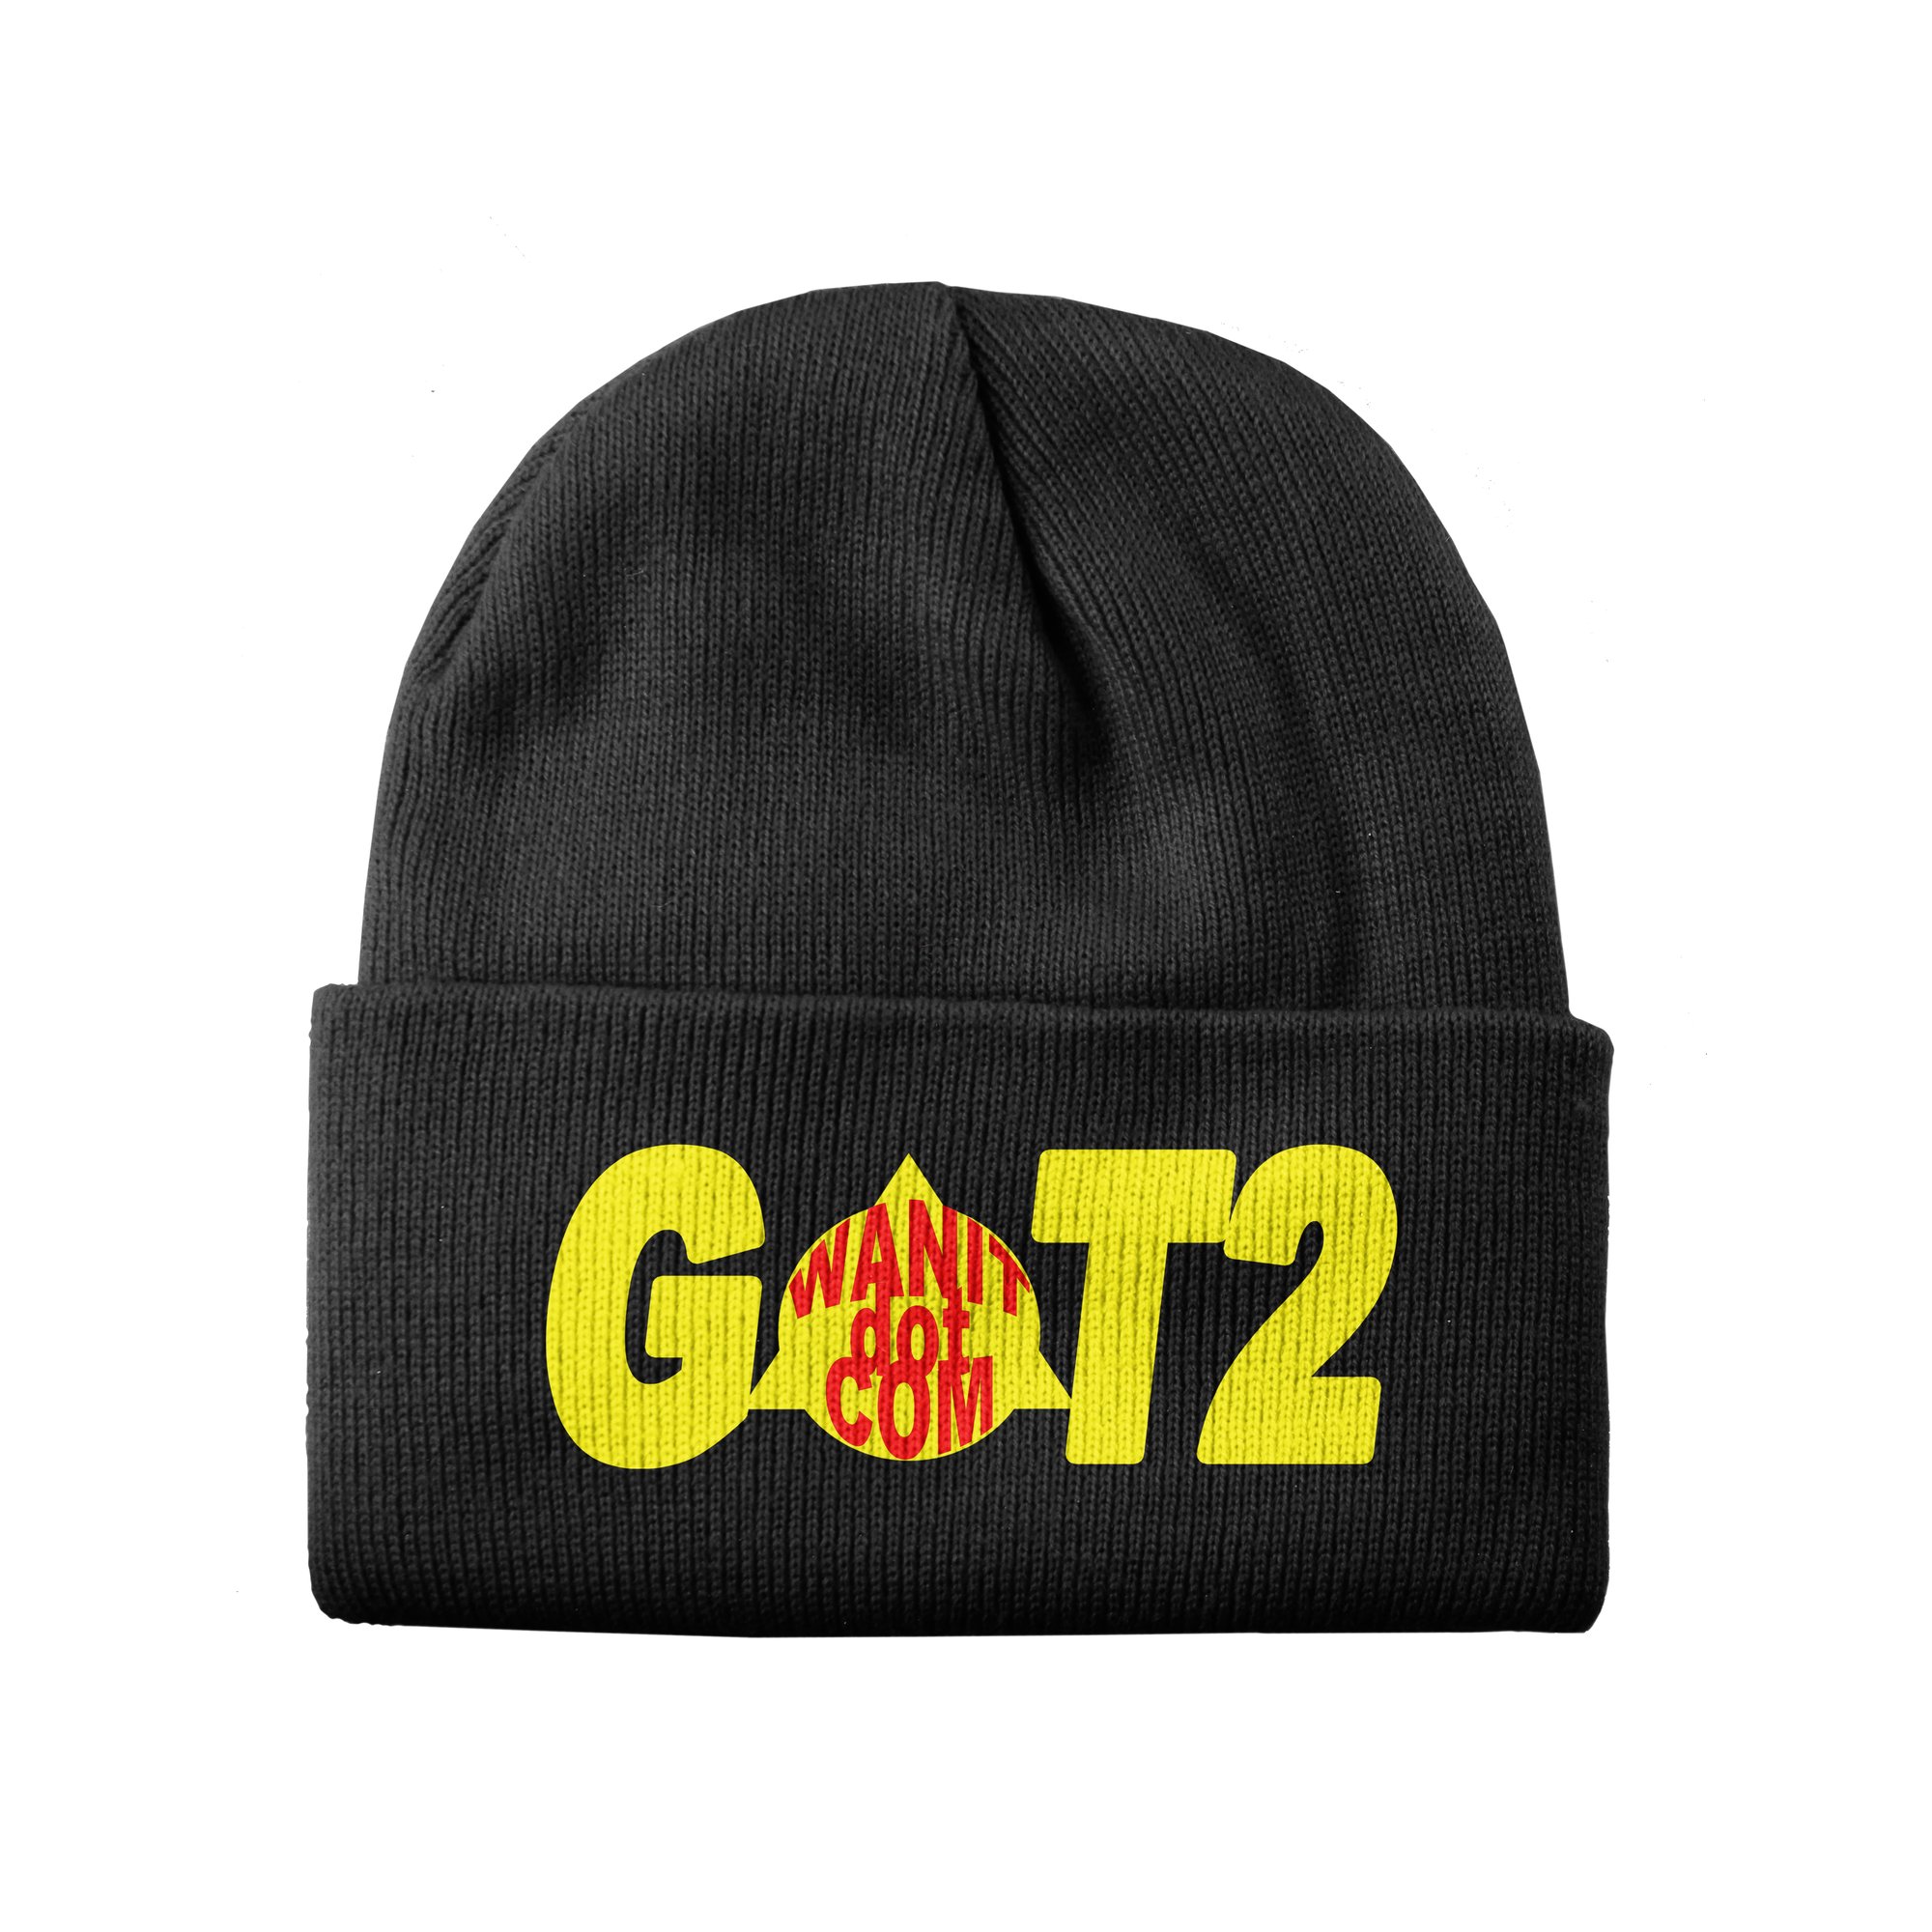 Image of Cuffed Beanie-G2W logo YELLOW and RED on BLACK